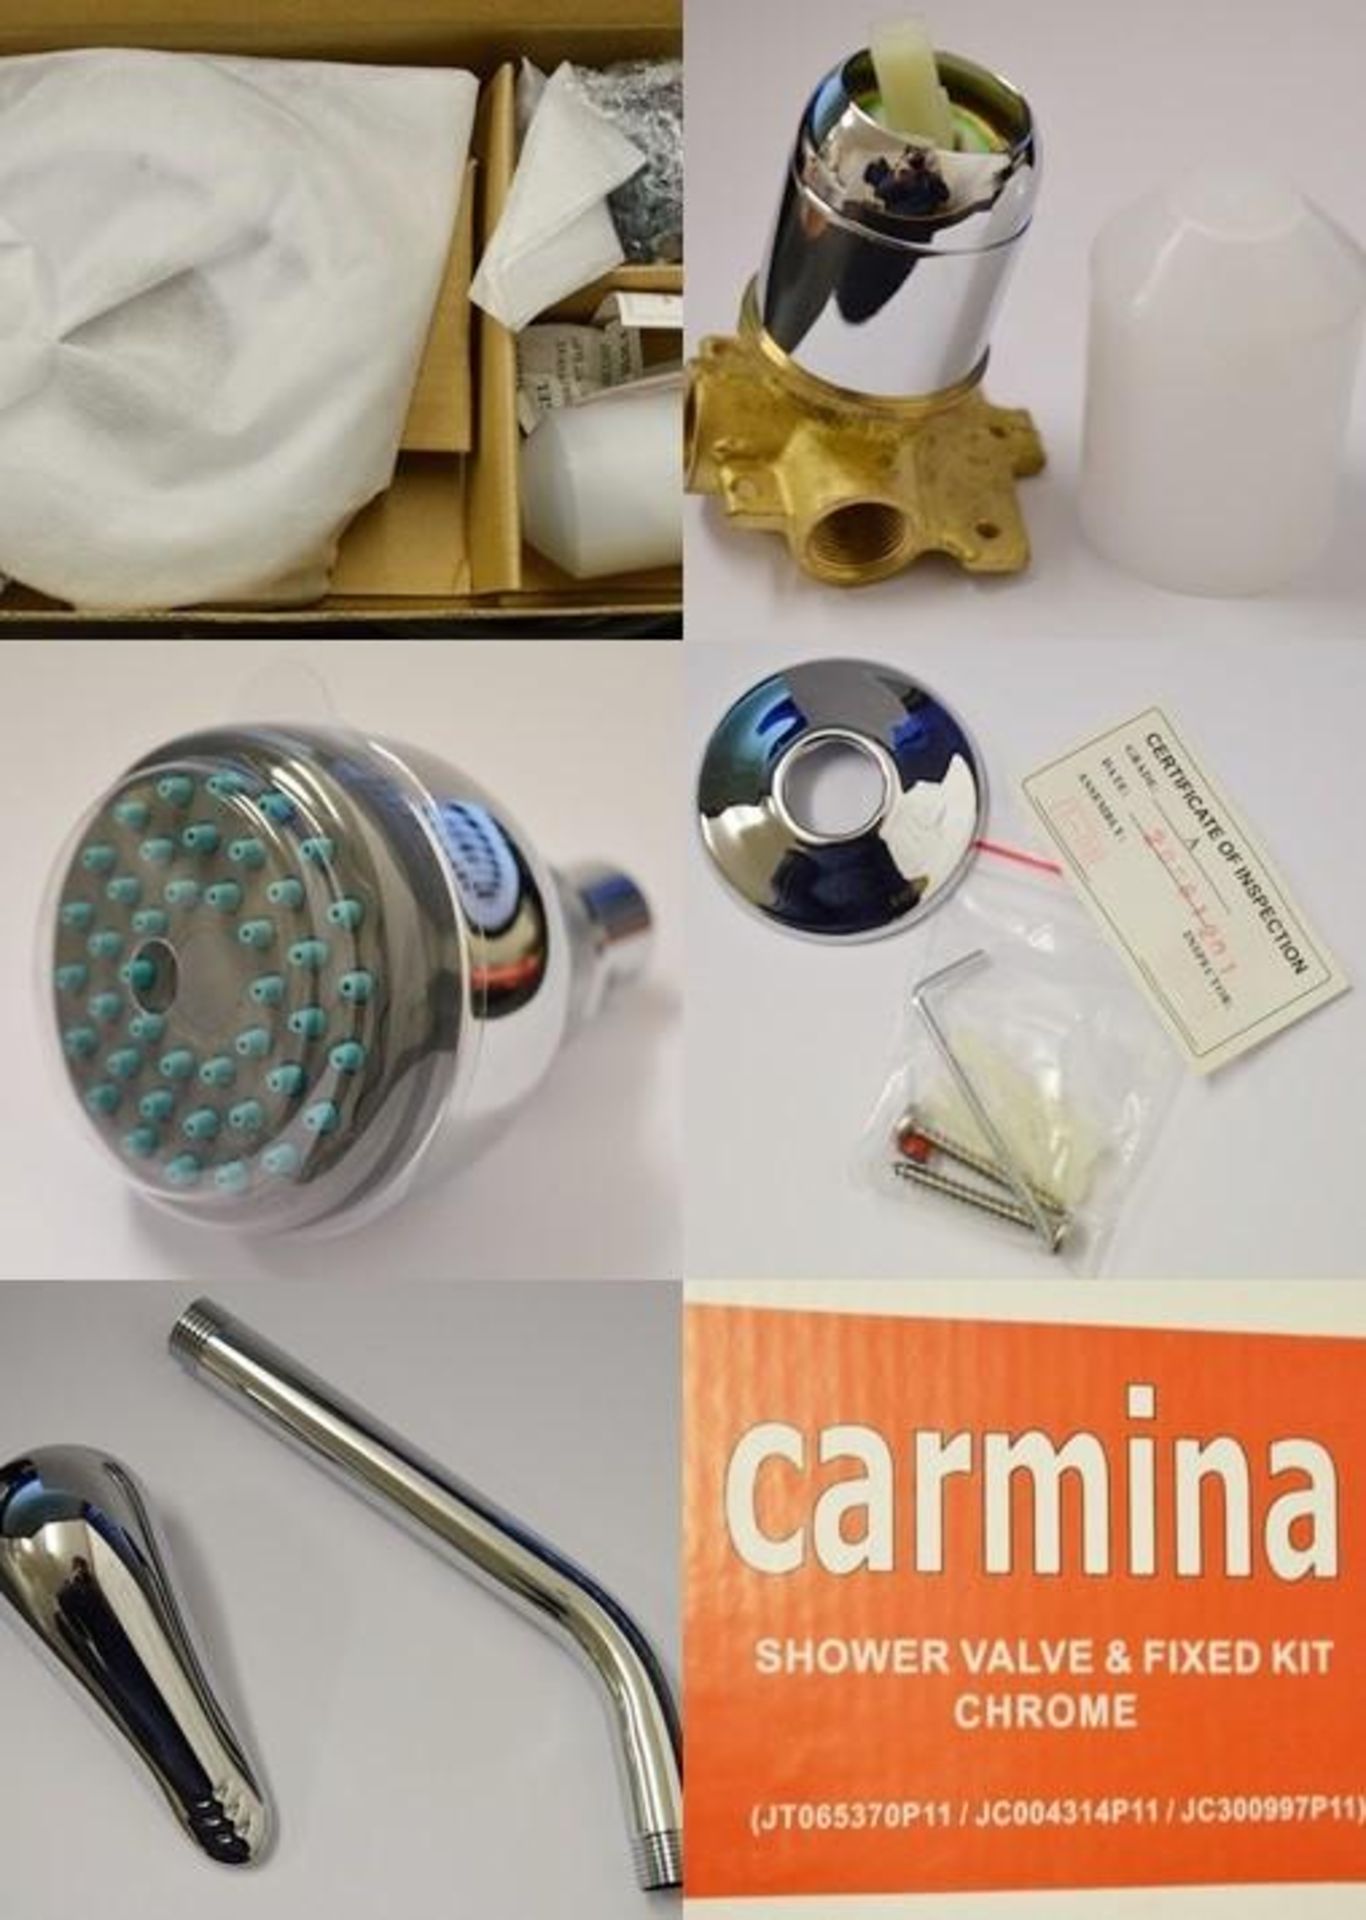 1 x Carmina Shower Valve Kit - Contains Chrome Shower Head, Fixed Arm and Manual Control - Brass Con - Image 6 of 13